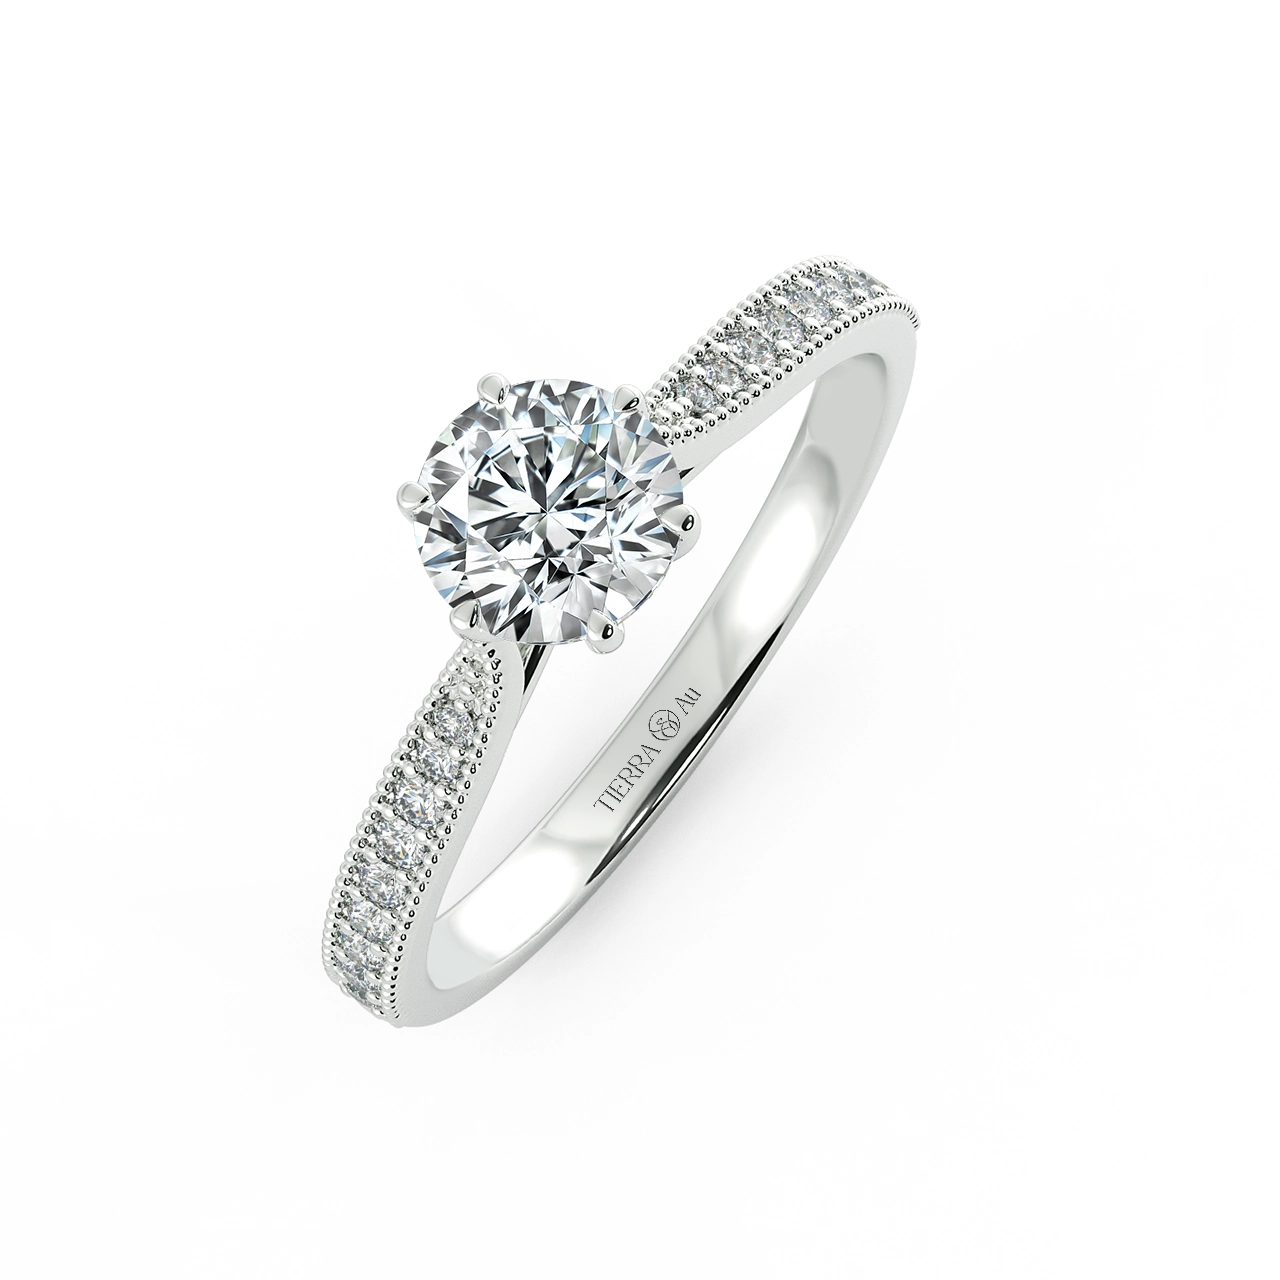 Six Prongs Solitaire Pave Engagement Ring with Milgrain NCH1204 3